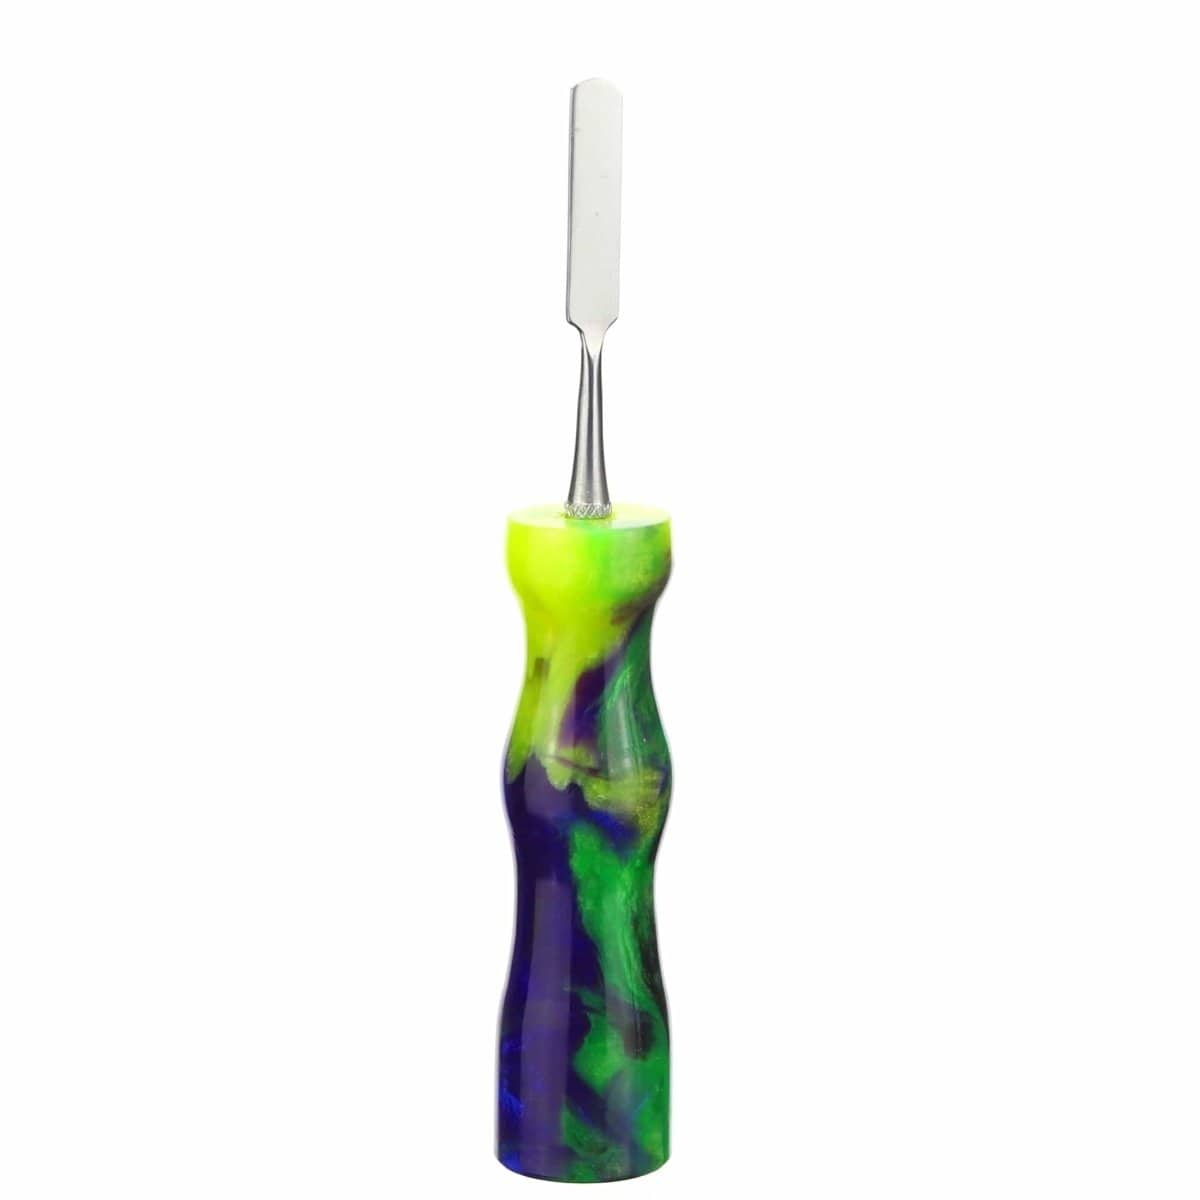 Galactic Crafts Accessory Design 2- Flat Space Slime Resin Dab Tool